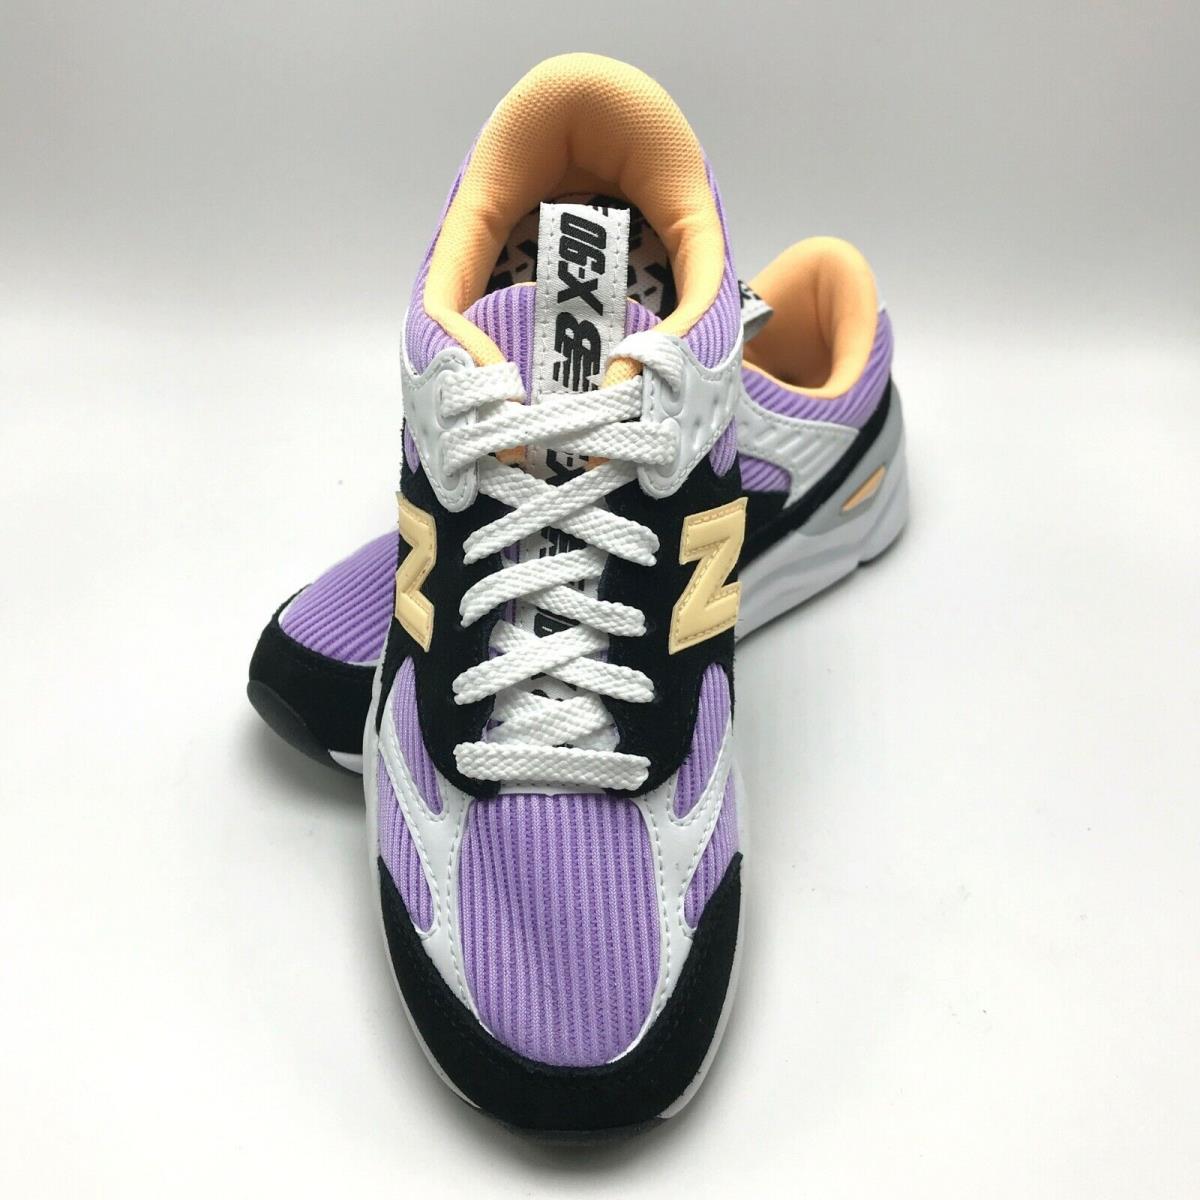 New Balance shoes  - Black with Dark Violet Glo 6